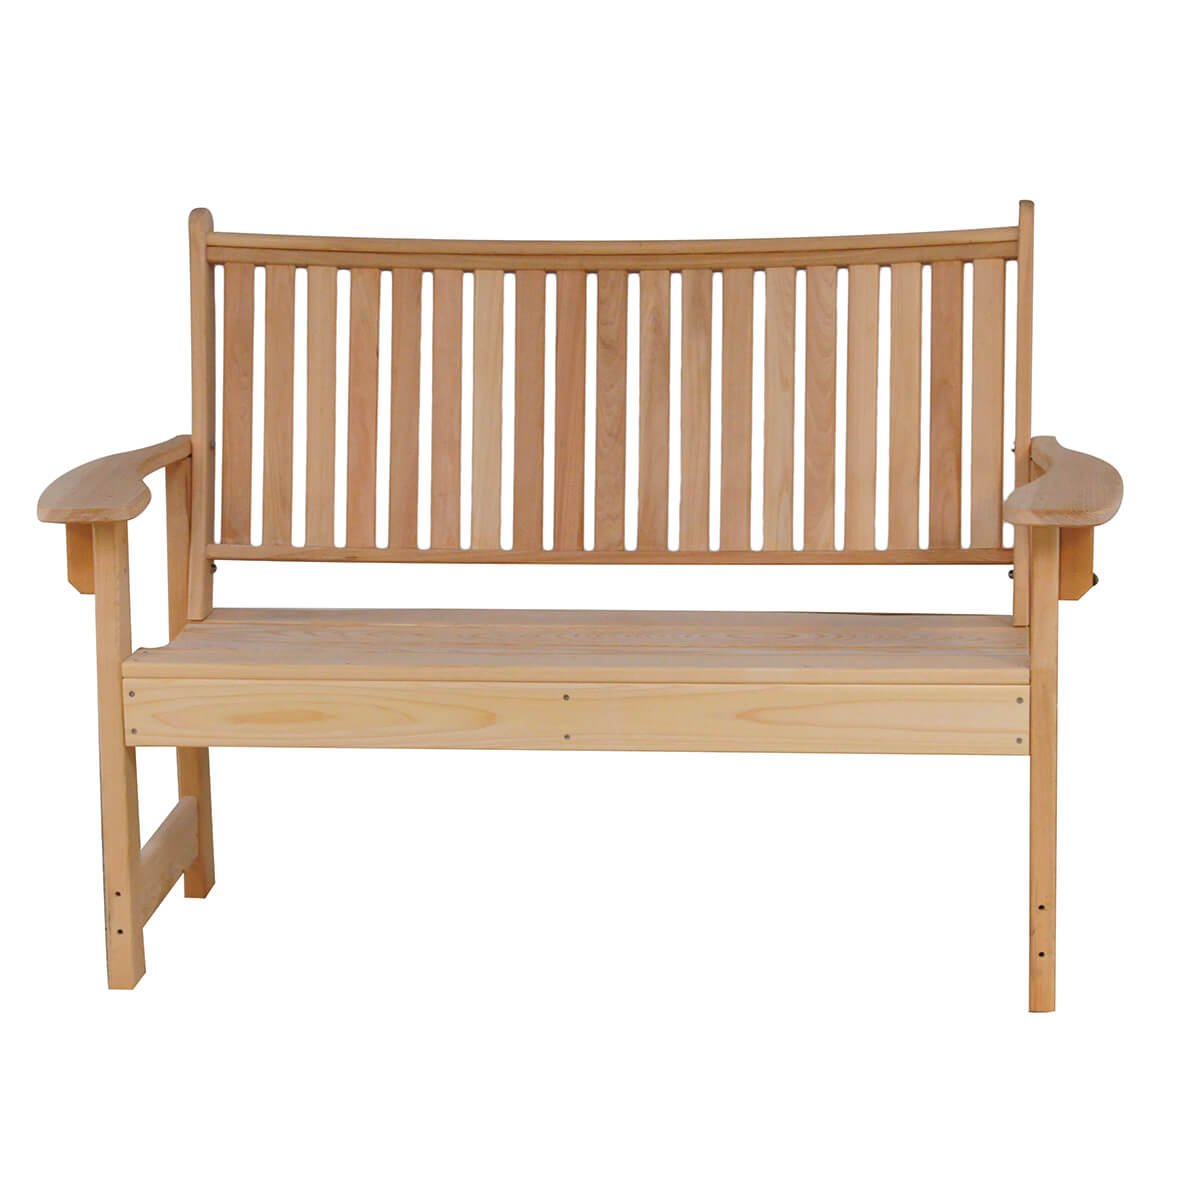 Read more about the article Cypress Grandpa 4 Foot Royal Garden Bench